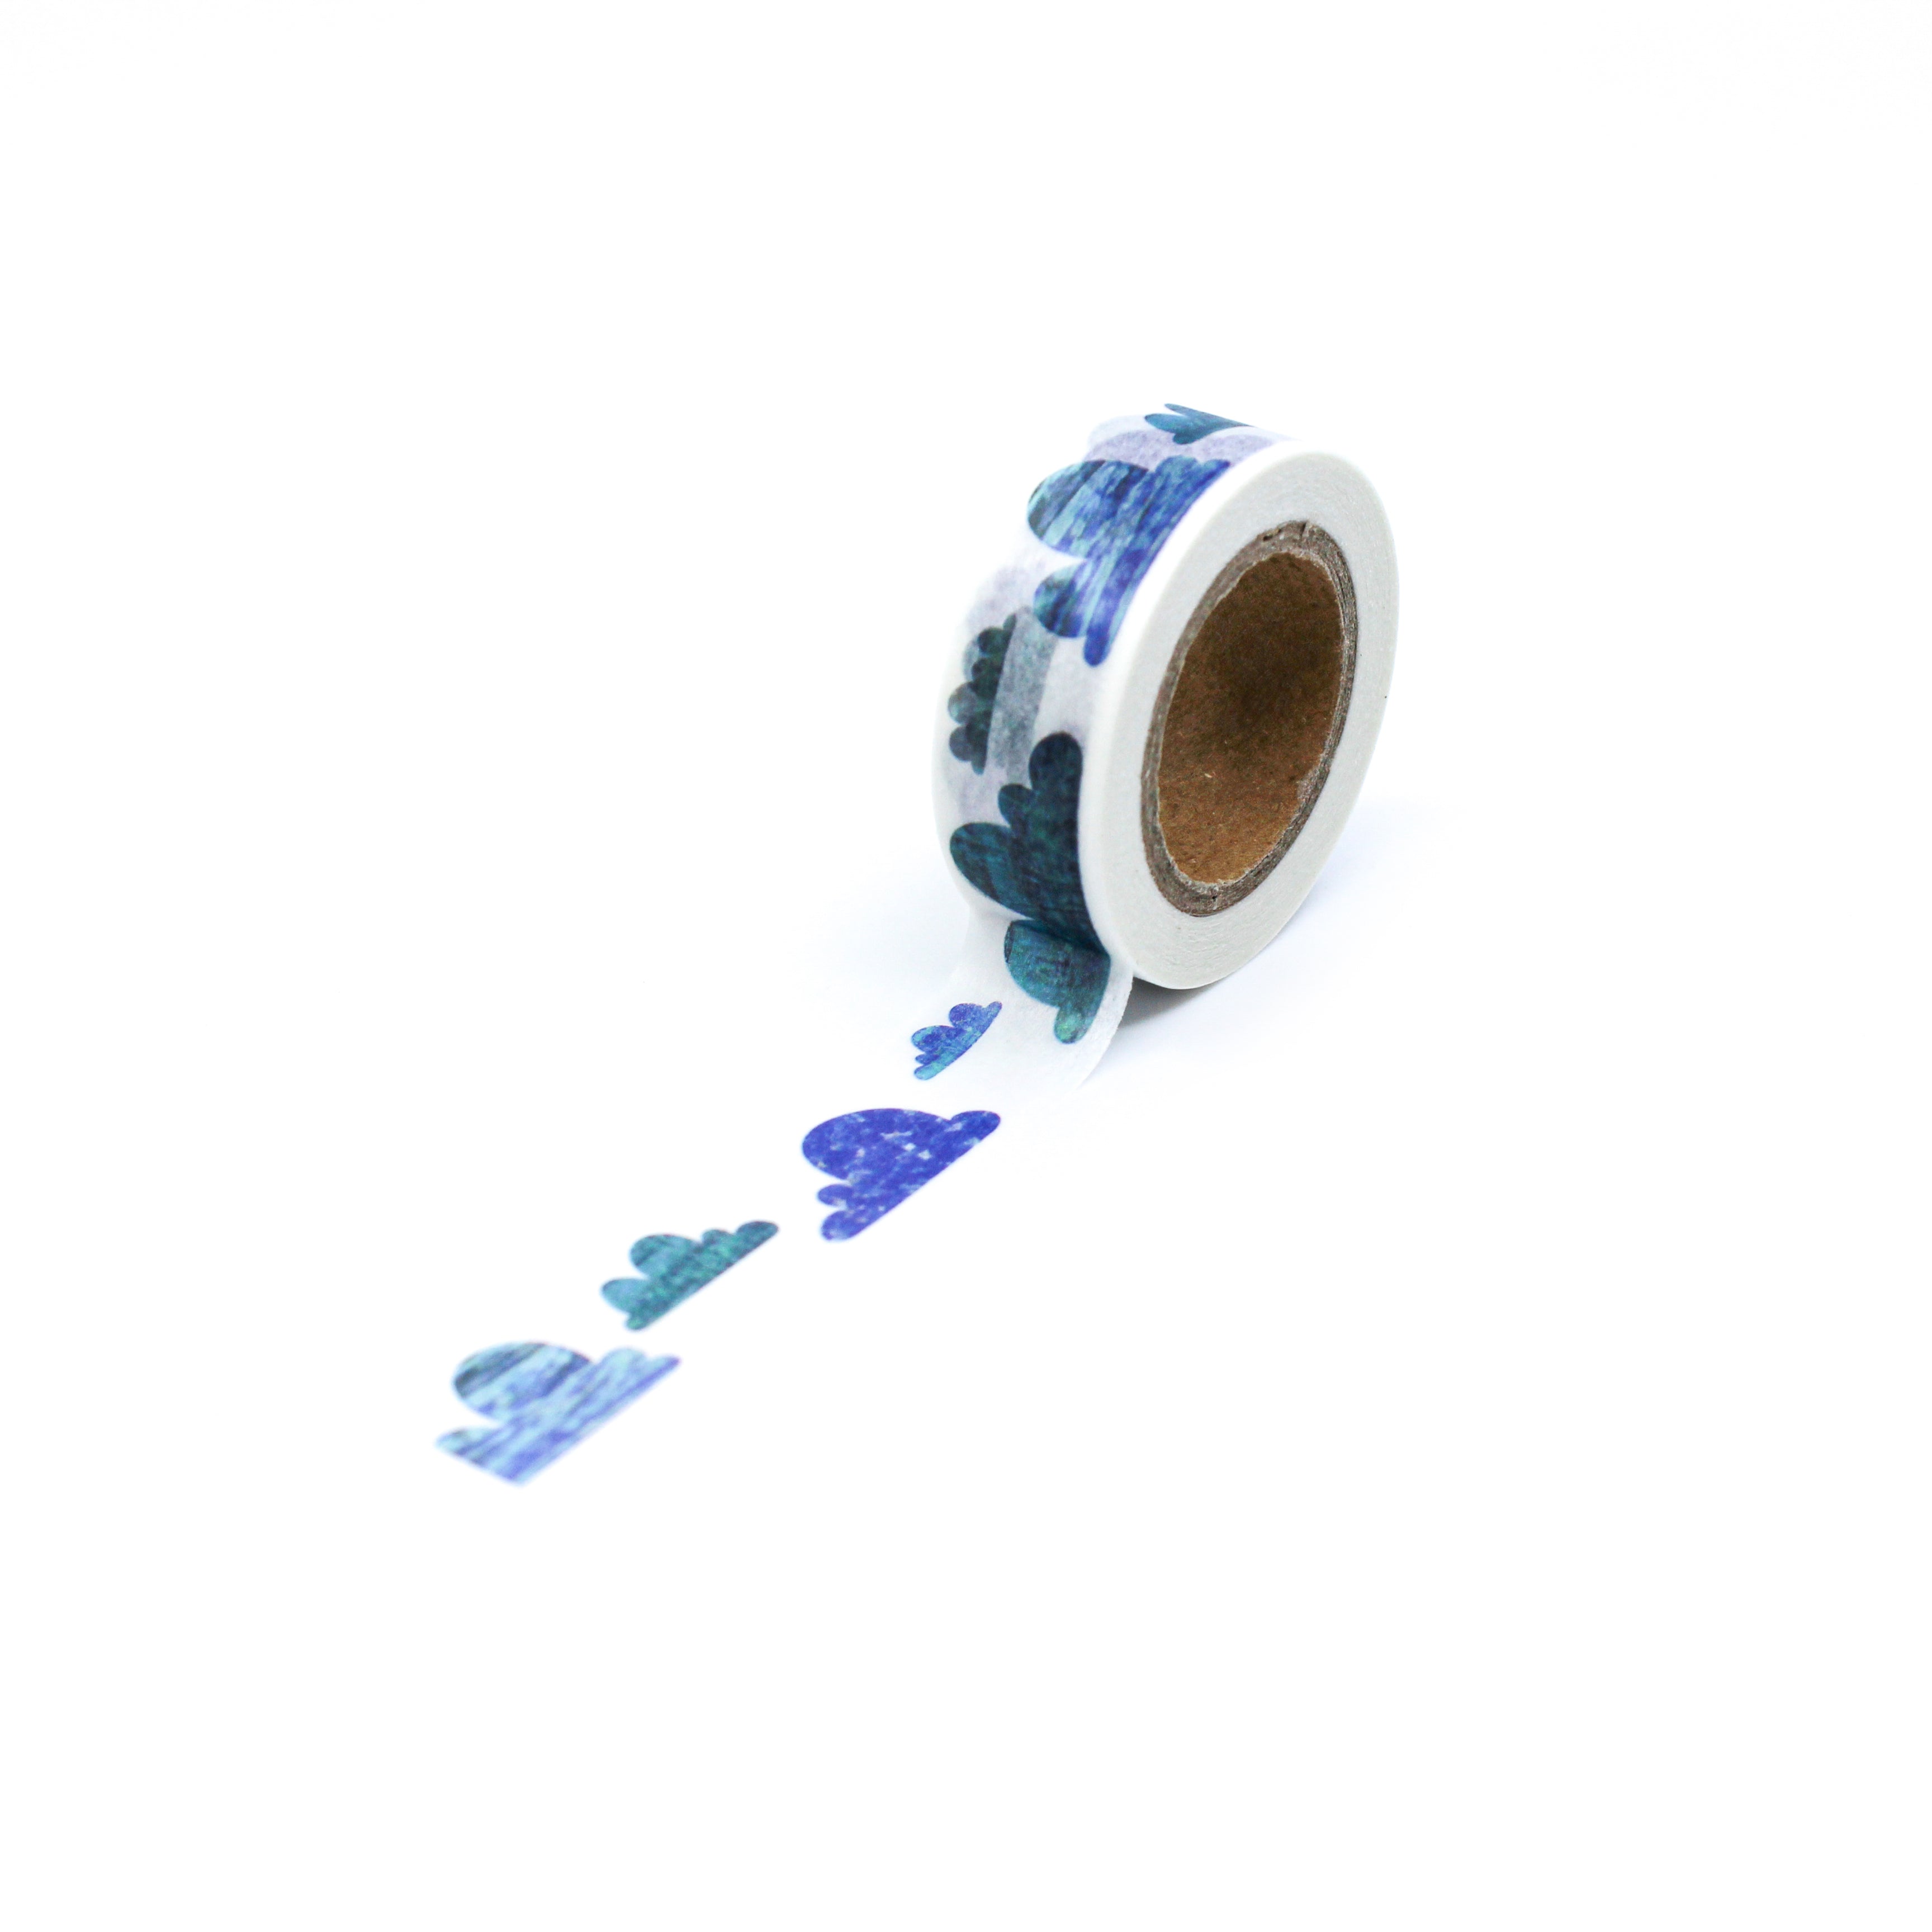 This is a full pattern repeat view of blue clouds washi tape BBB Supplies Craft Shop